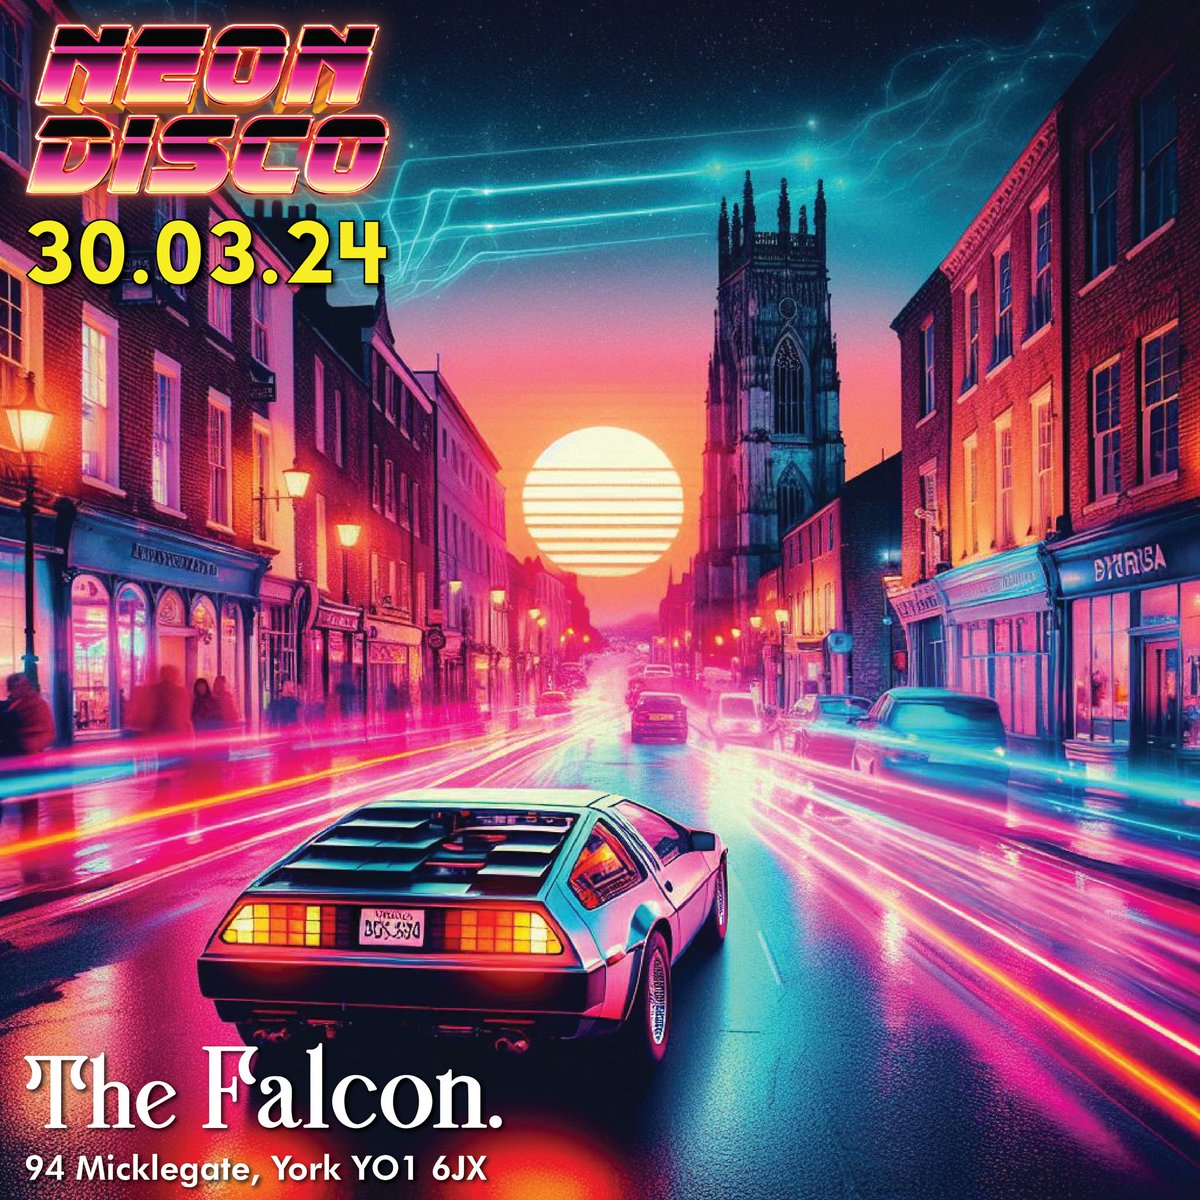 It's Neon Disco day!

Have no regrets as the sun sets tonight from 7pm @thefalconyork!